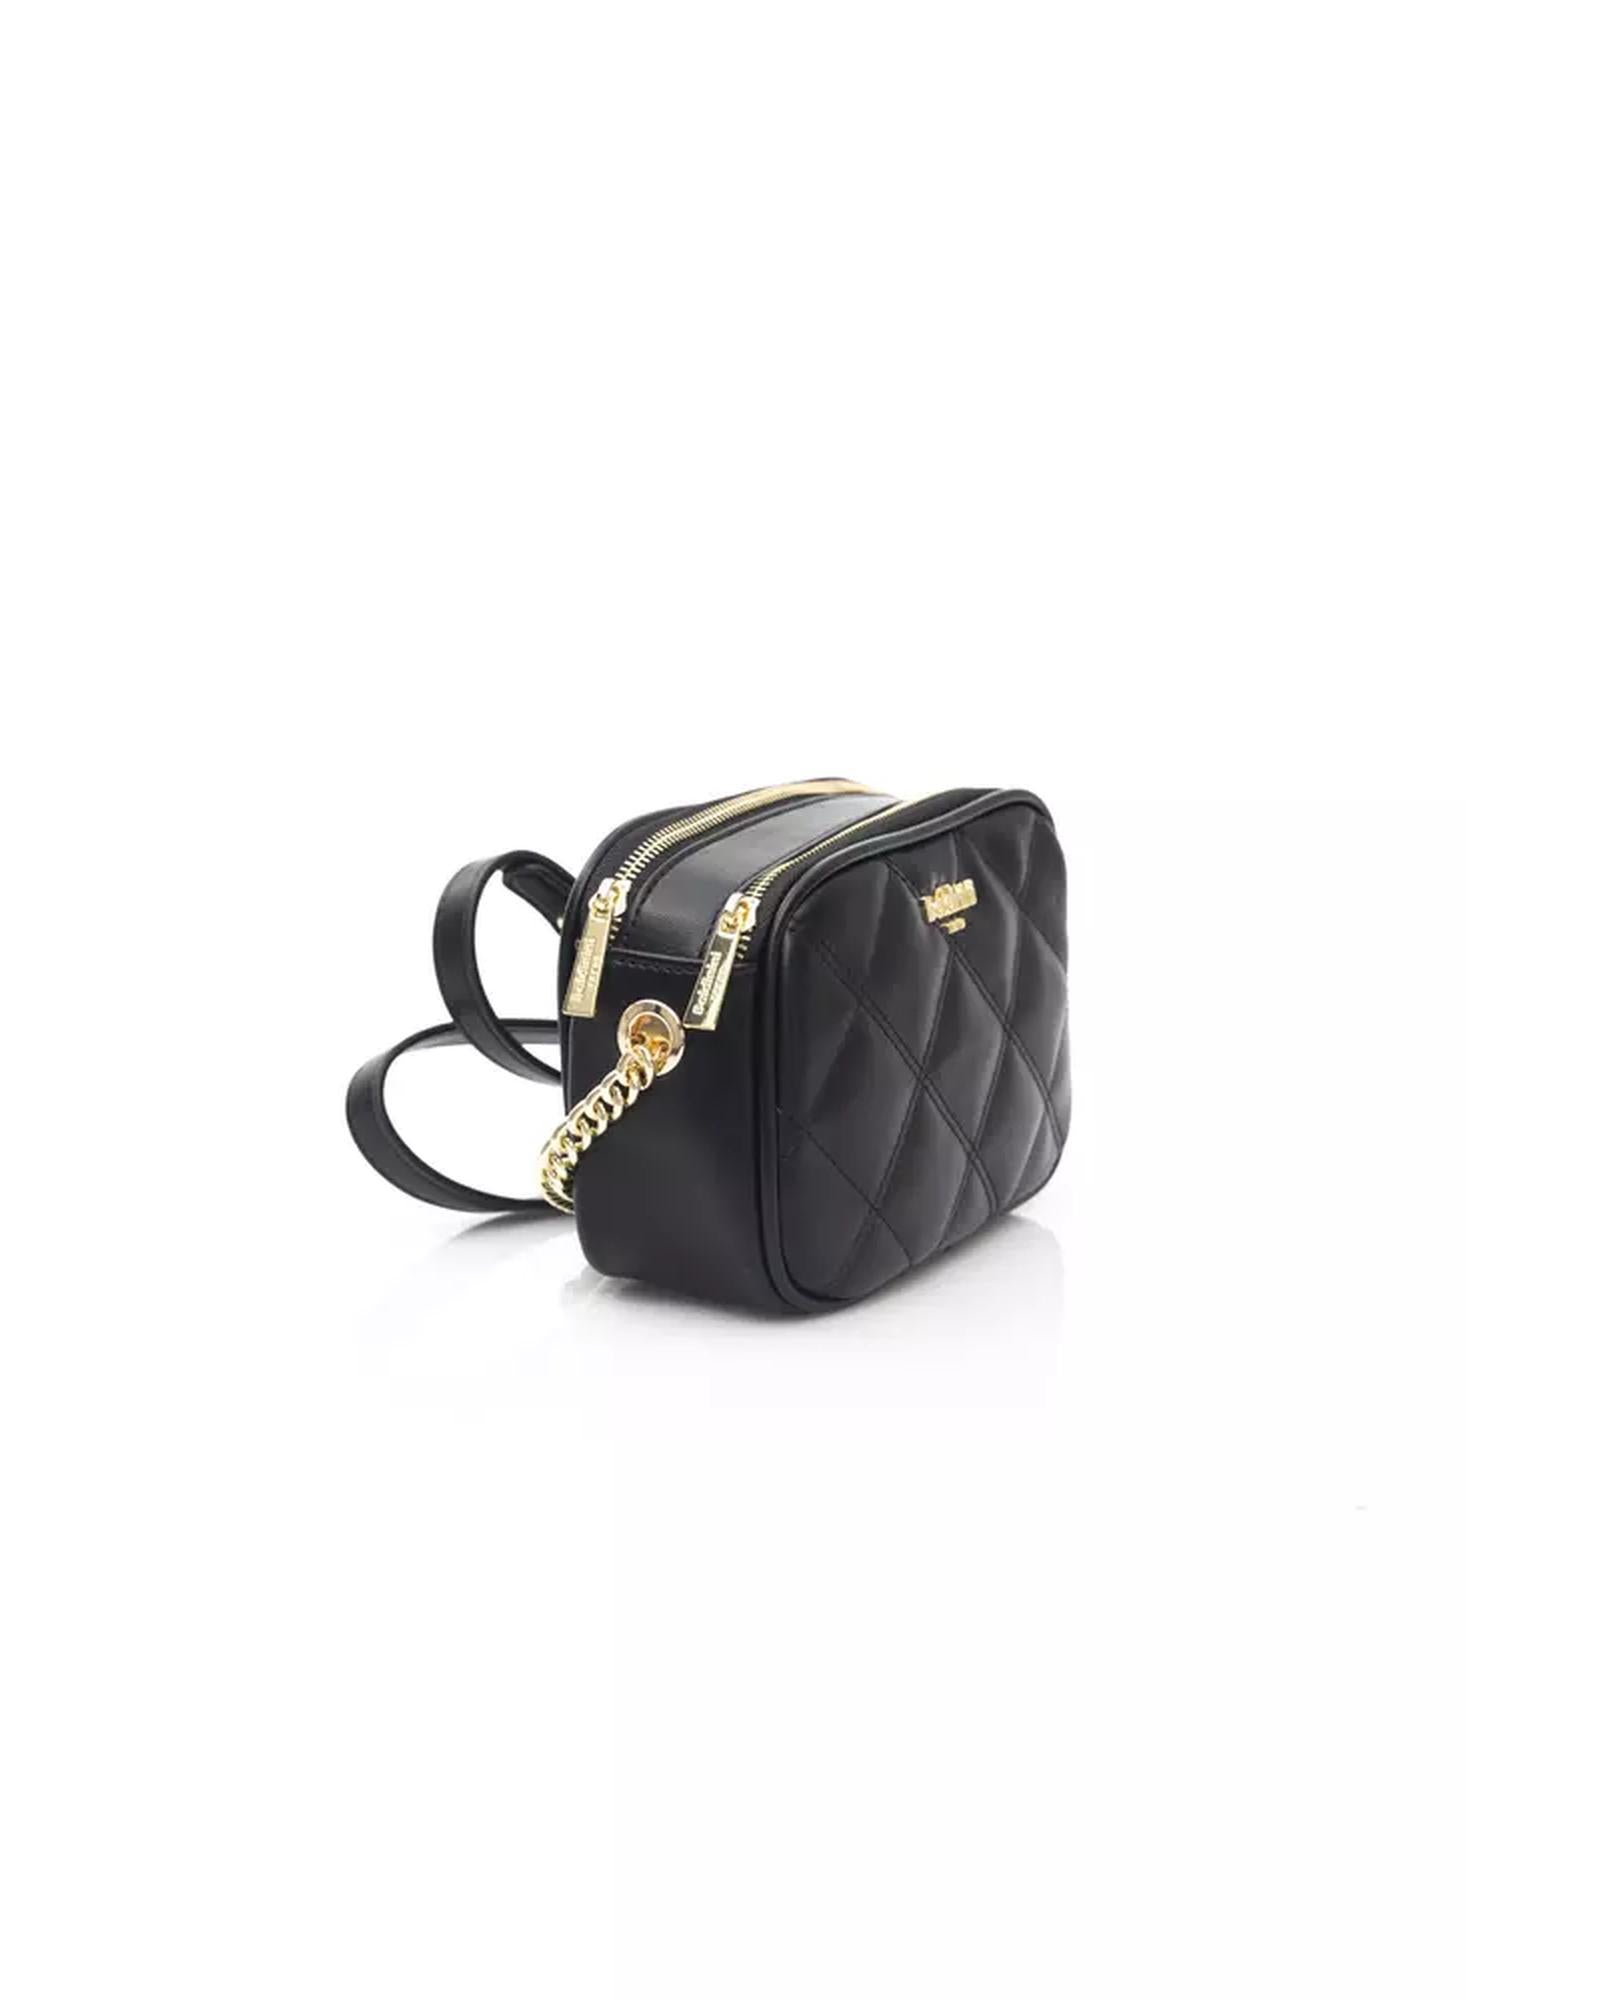 Double Compartment Shoulder Bag with Zip Closure and Golden Details One Size Women